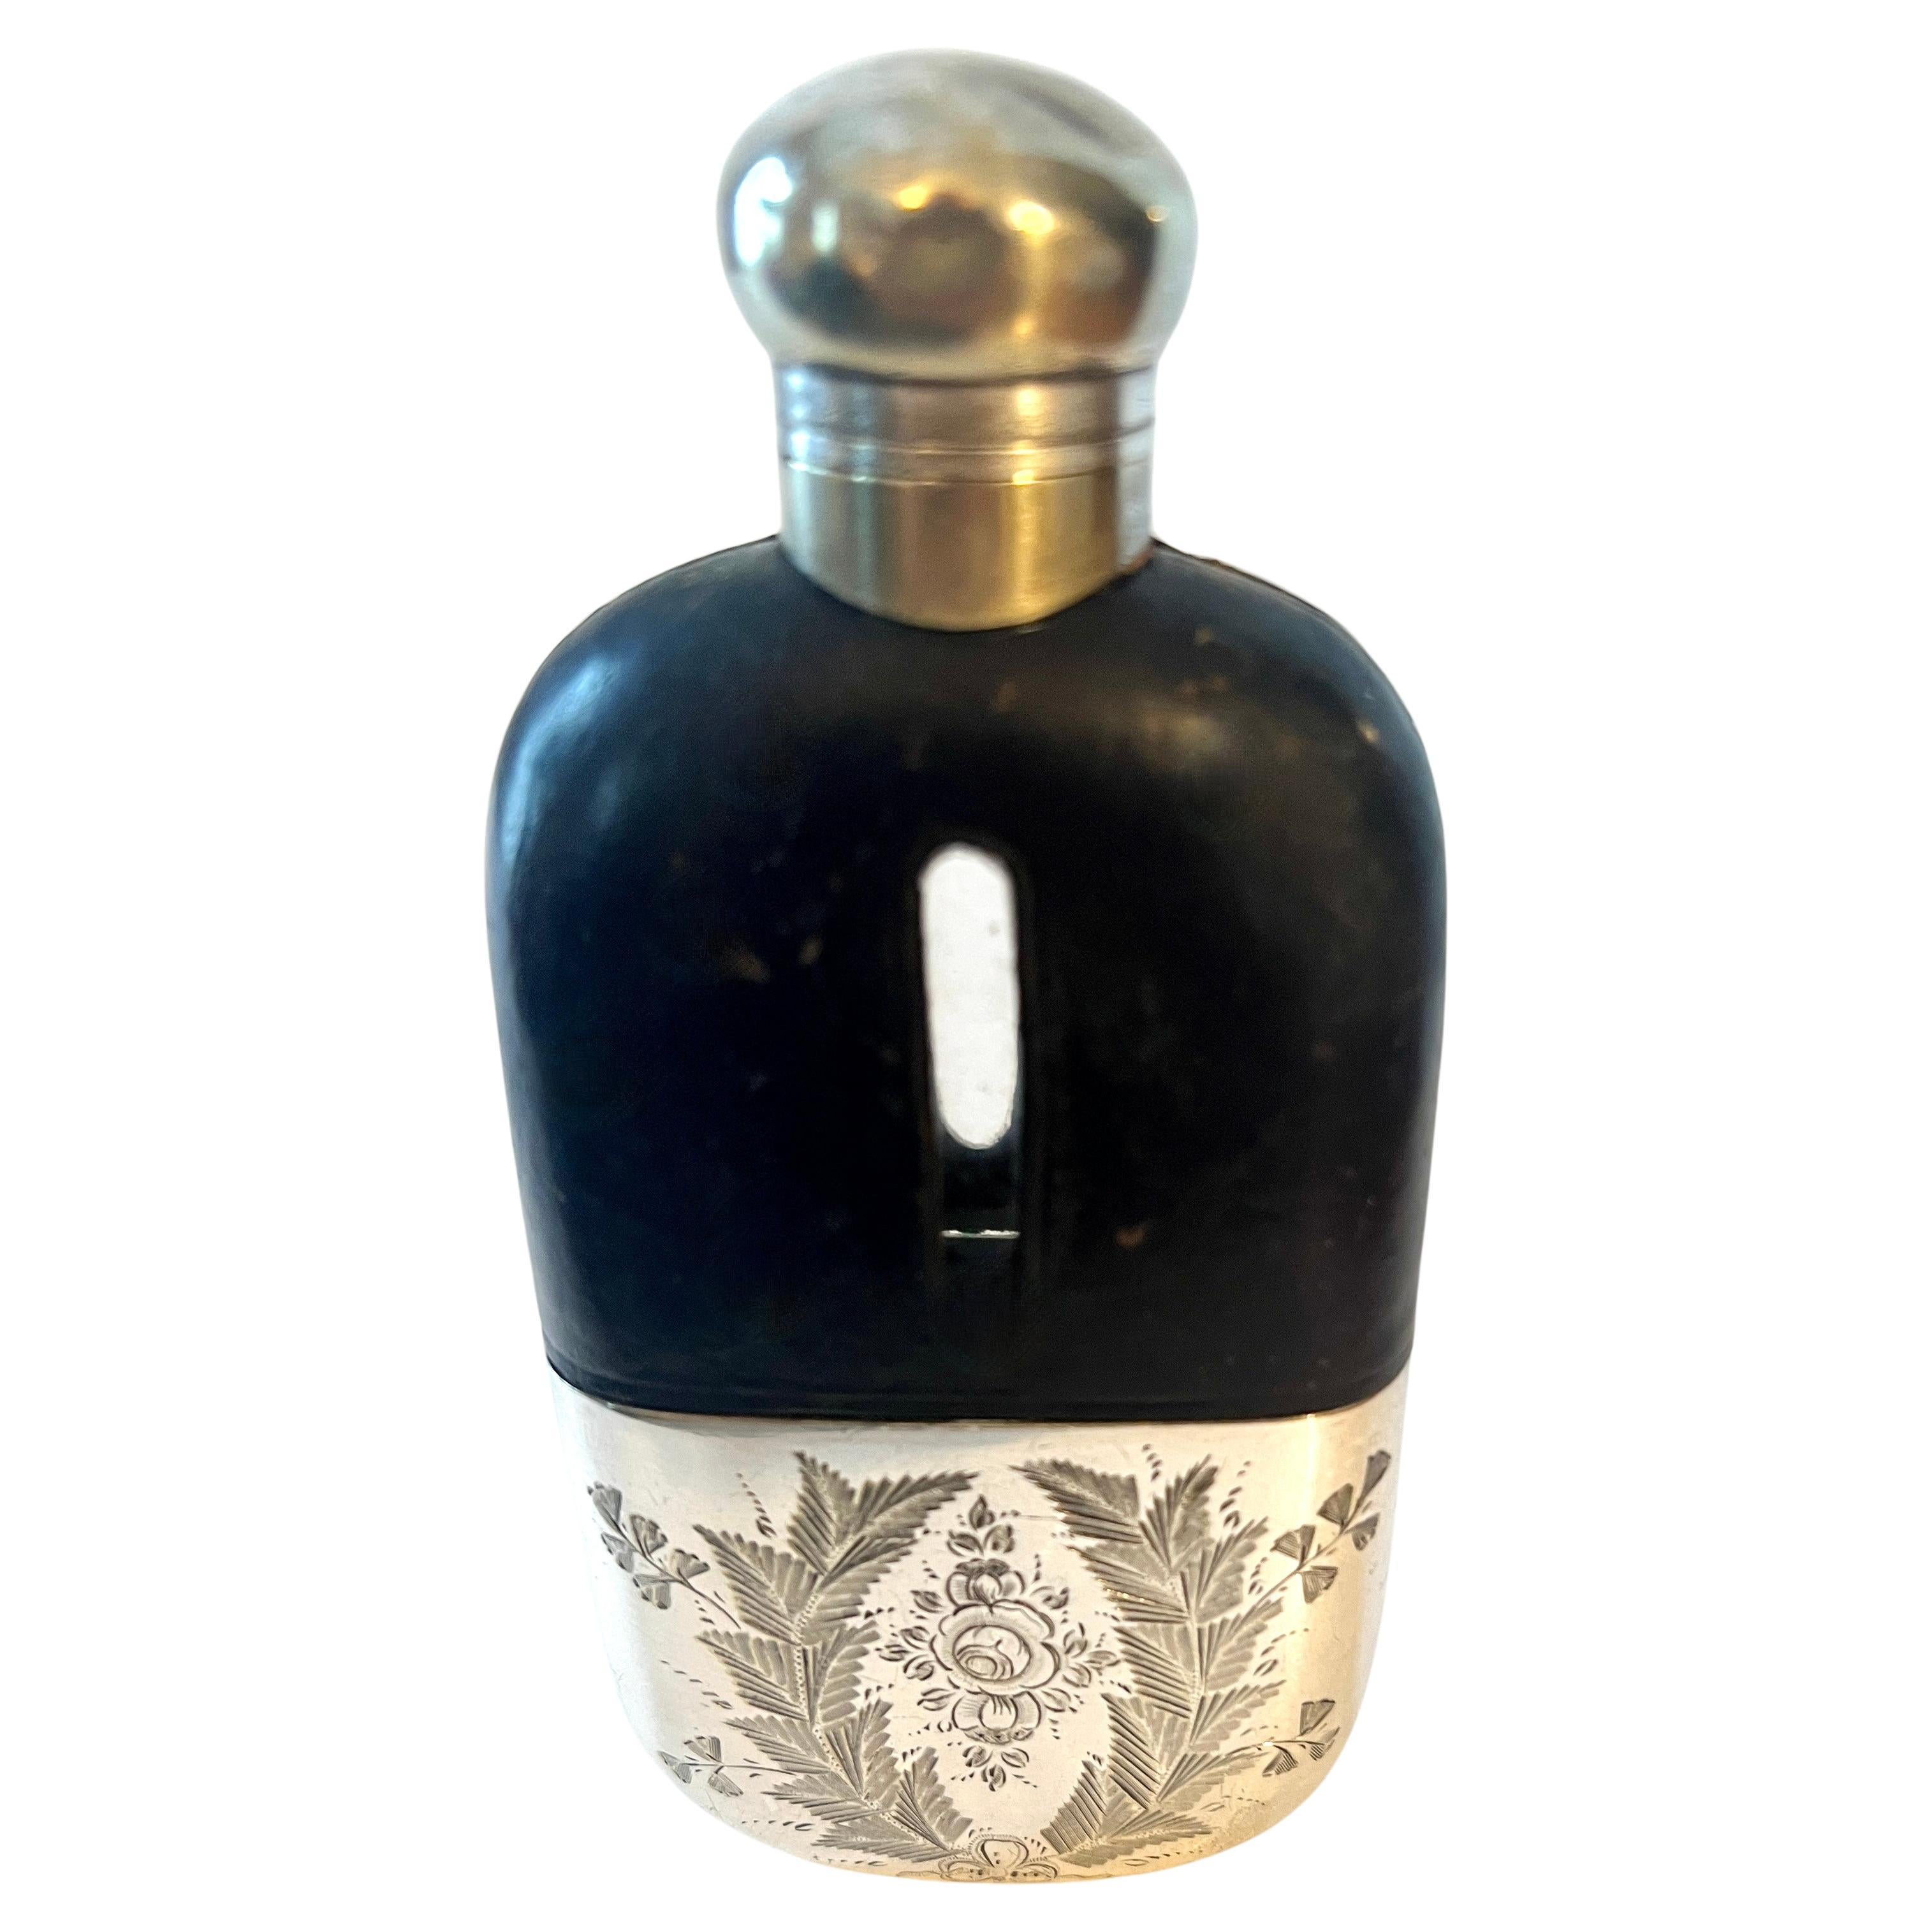 Glass Flask with Etched Silver Plate Base and Leather Top 